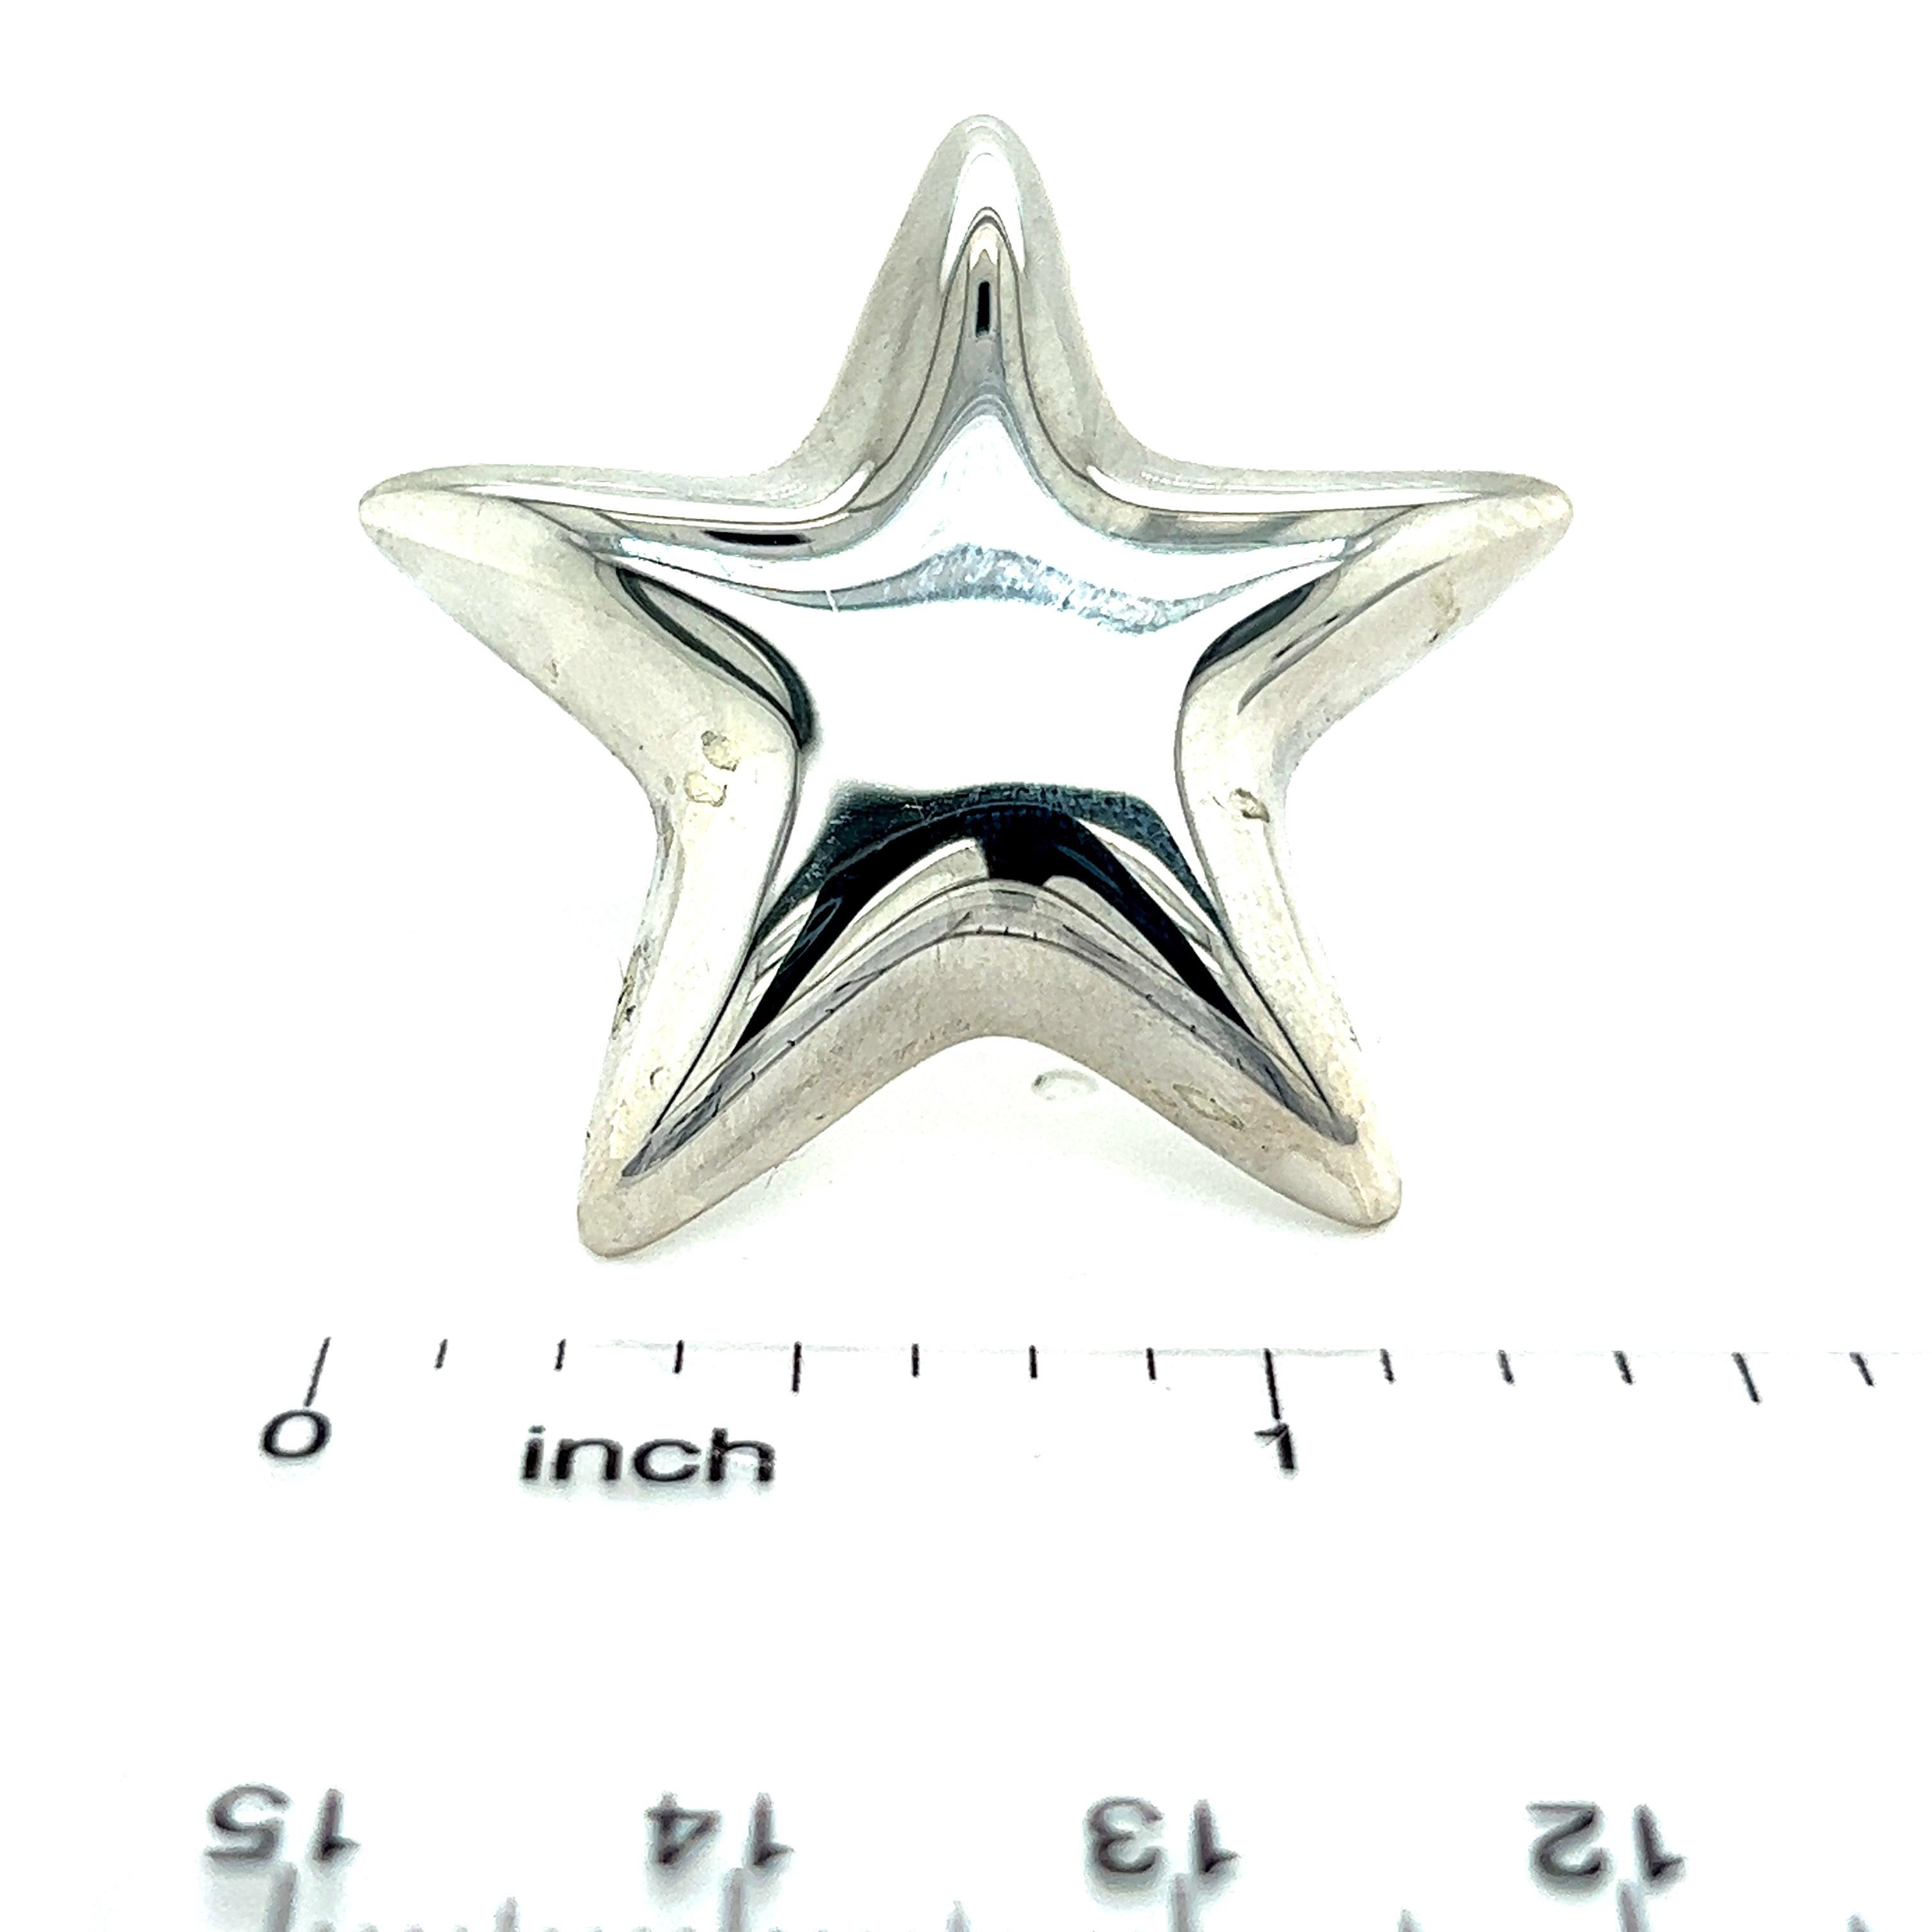 Authentic Tiffany & Co Estate Puffed Star Brooch Silver TIF389

Retail: $599.00

TRUSTED SELLER SINCE 2002

PLEASE SEE OUR HUNDREDS OF POSITIVE FEEDBACKS FROM OUR CLIENTS!!

FREE SHIPPING
Grams: 10.2
Shape: Puffed Star 
Material: Sterling